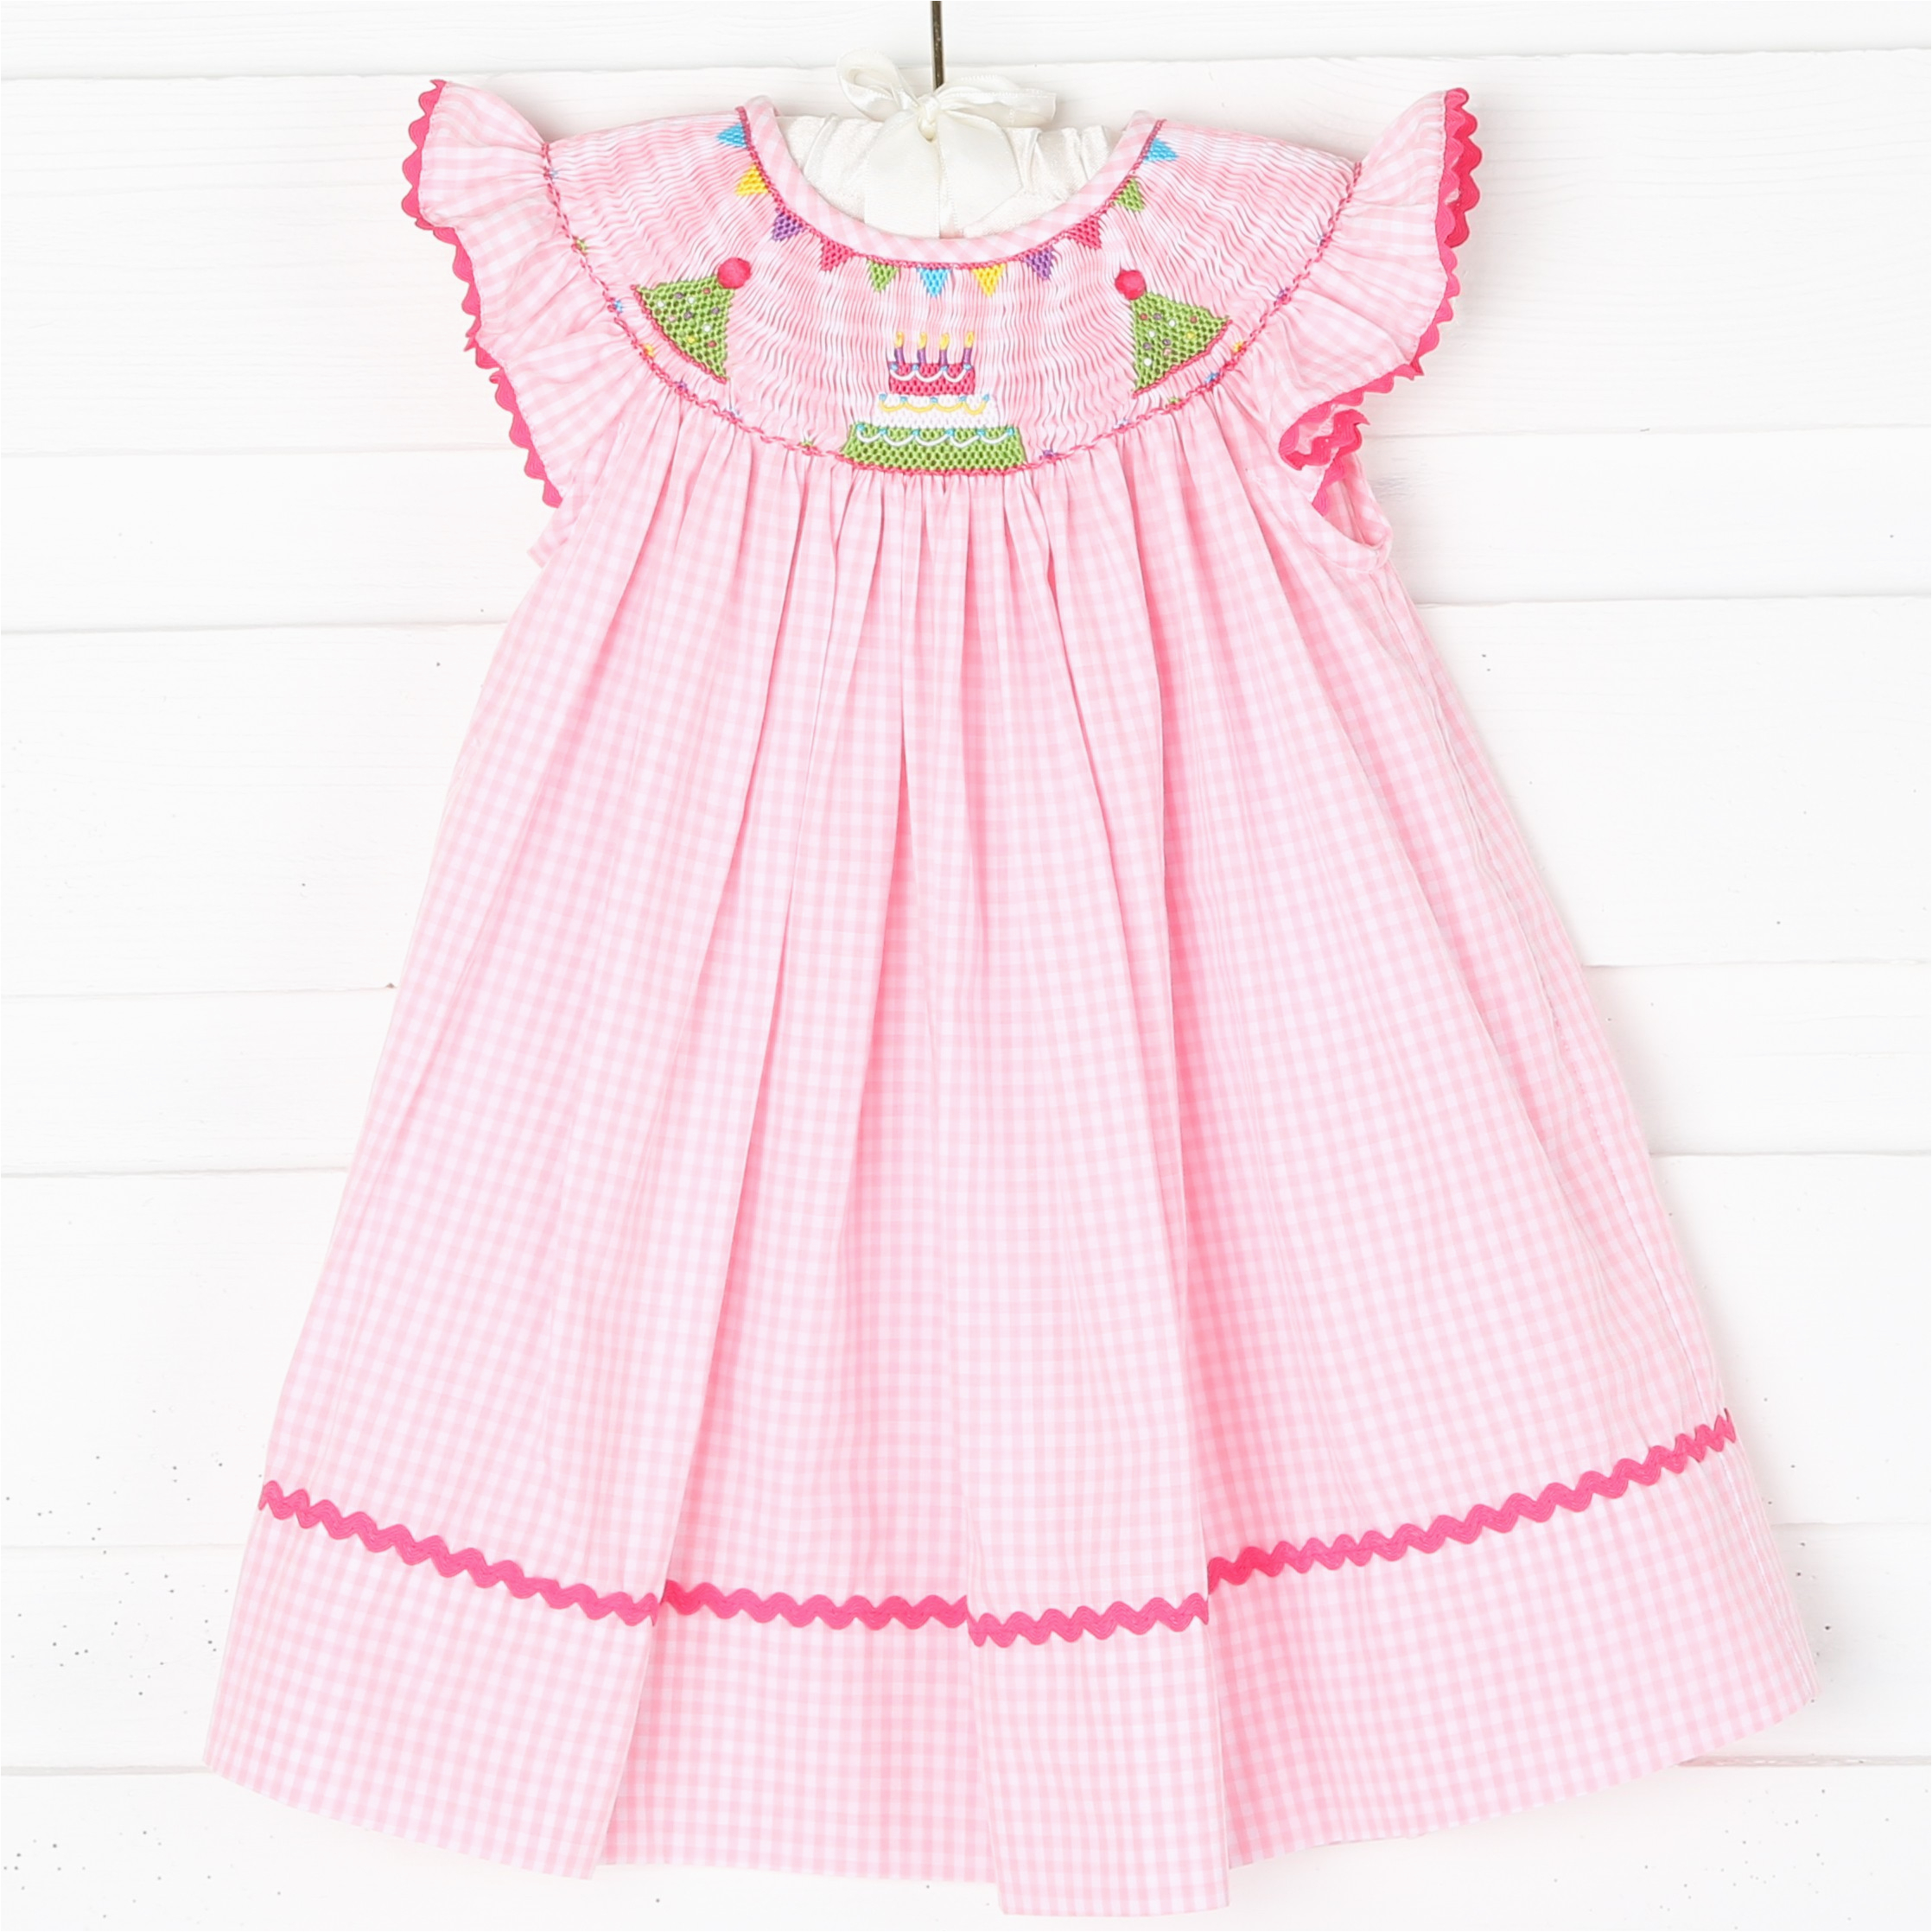 Smocked Birthday Dresses Smocked Birthday Dress Pink Gingham Smocked Auctions